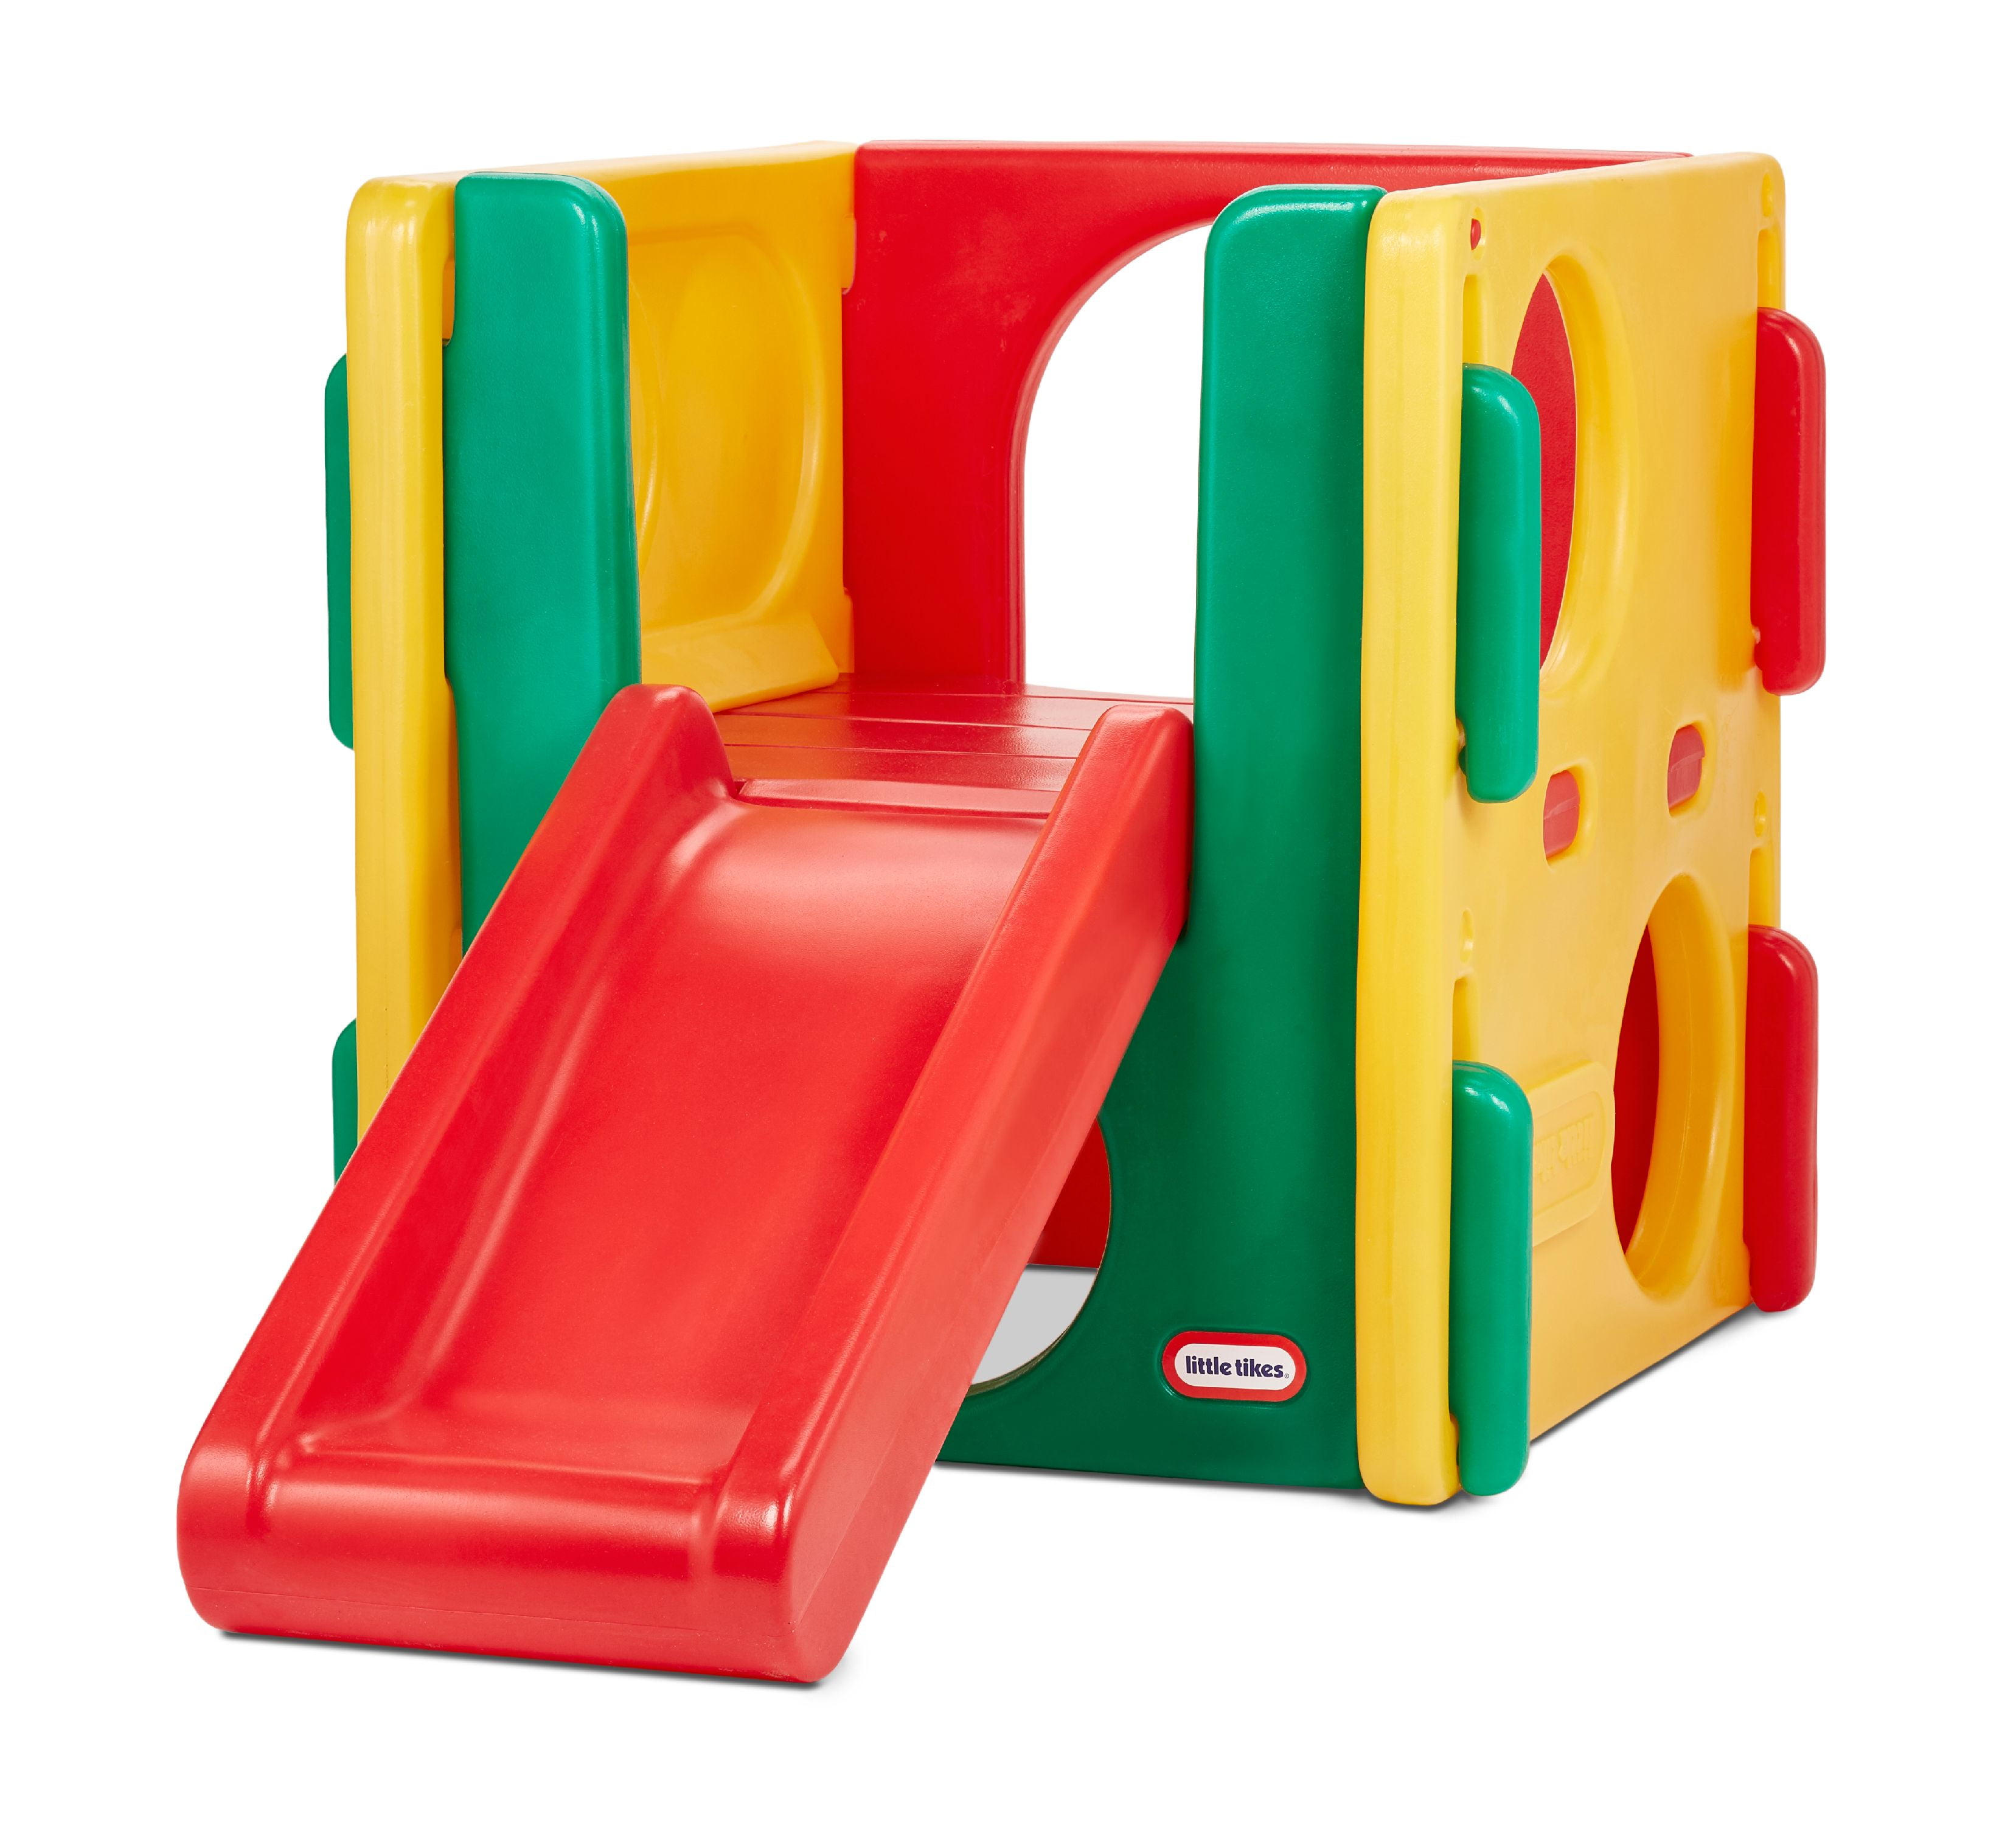 Little Tikes Jr. Activity Gym for 